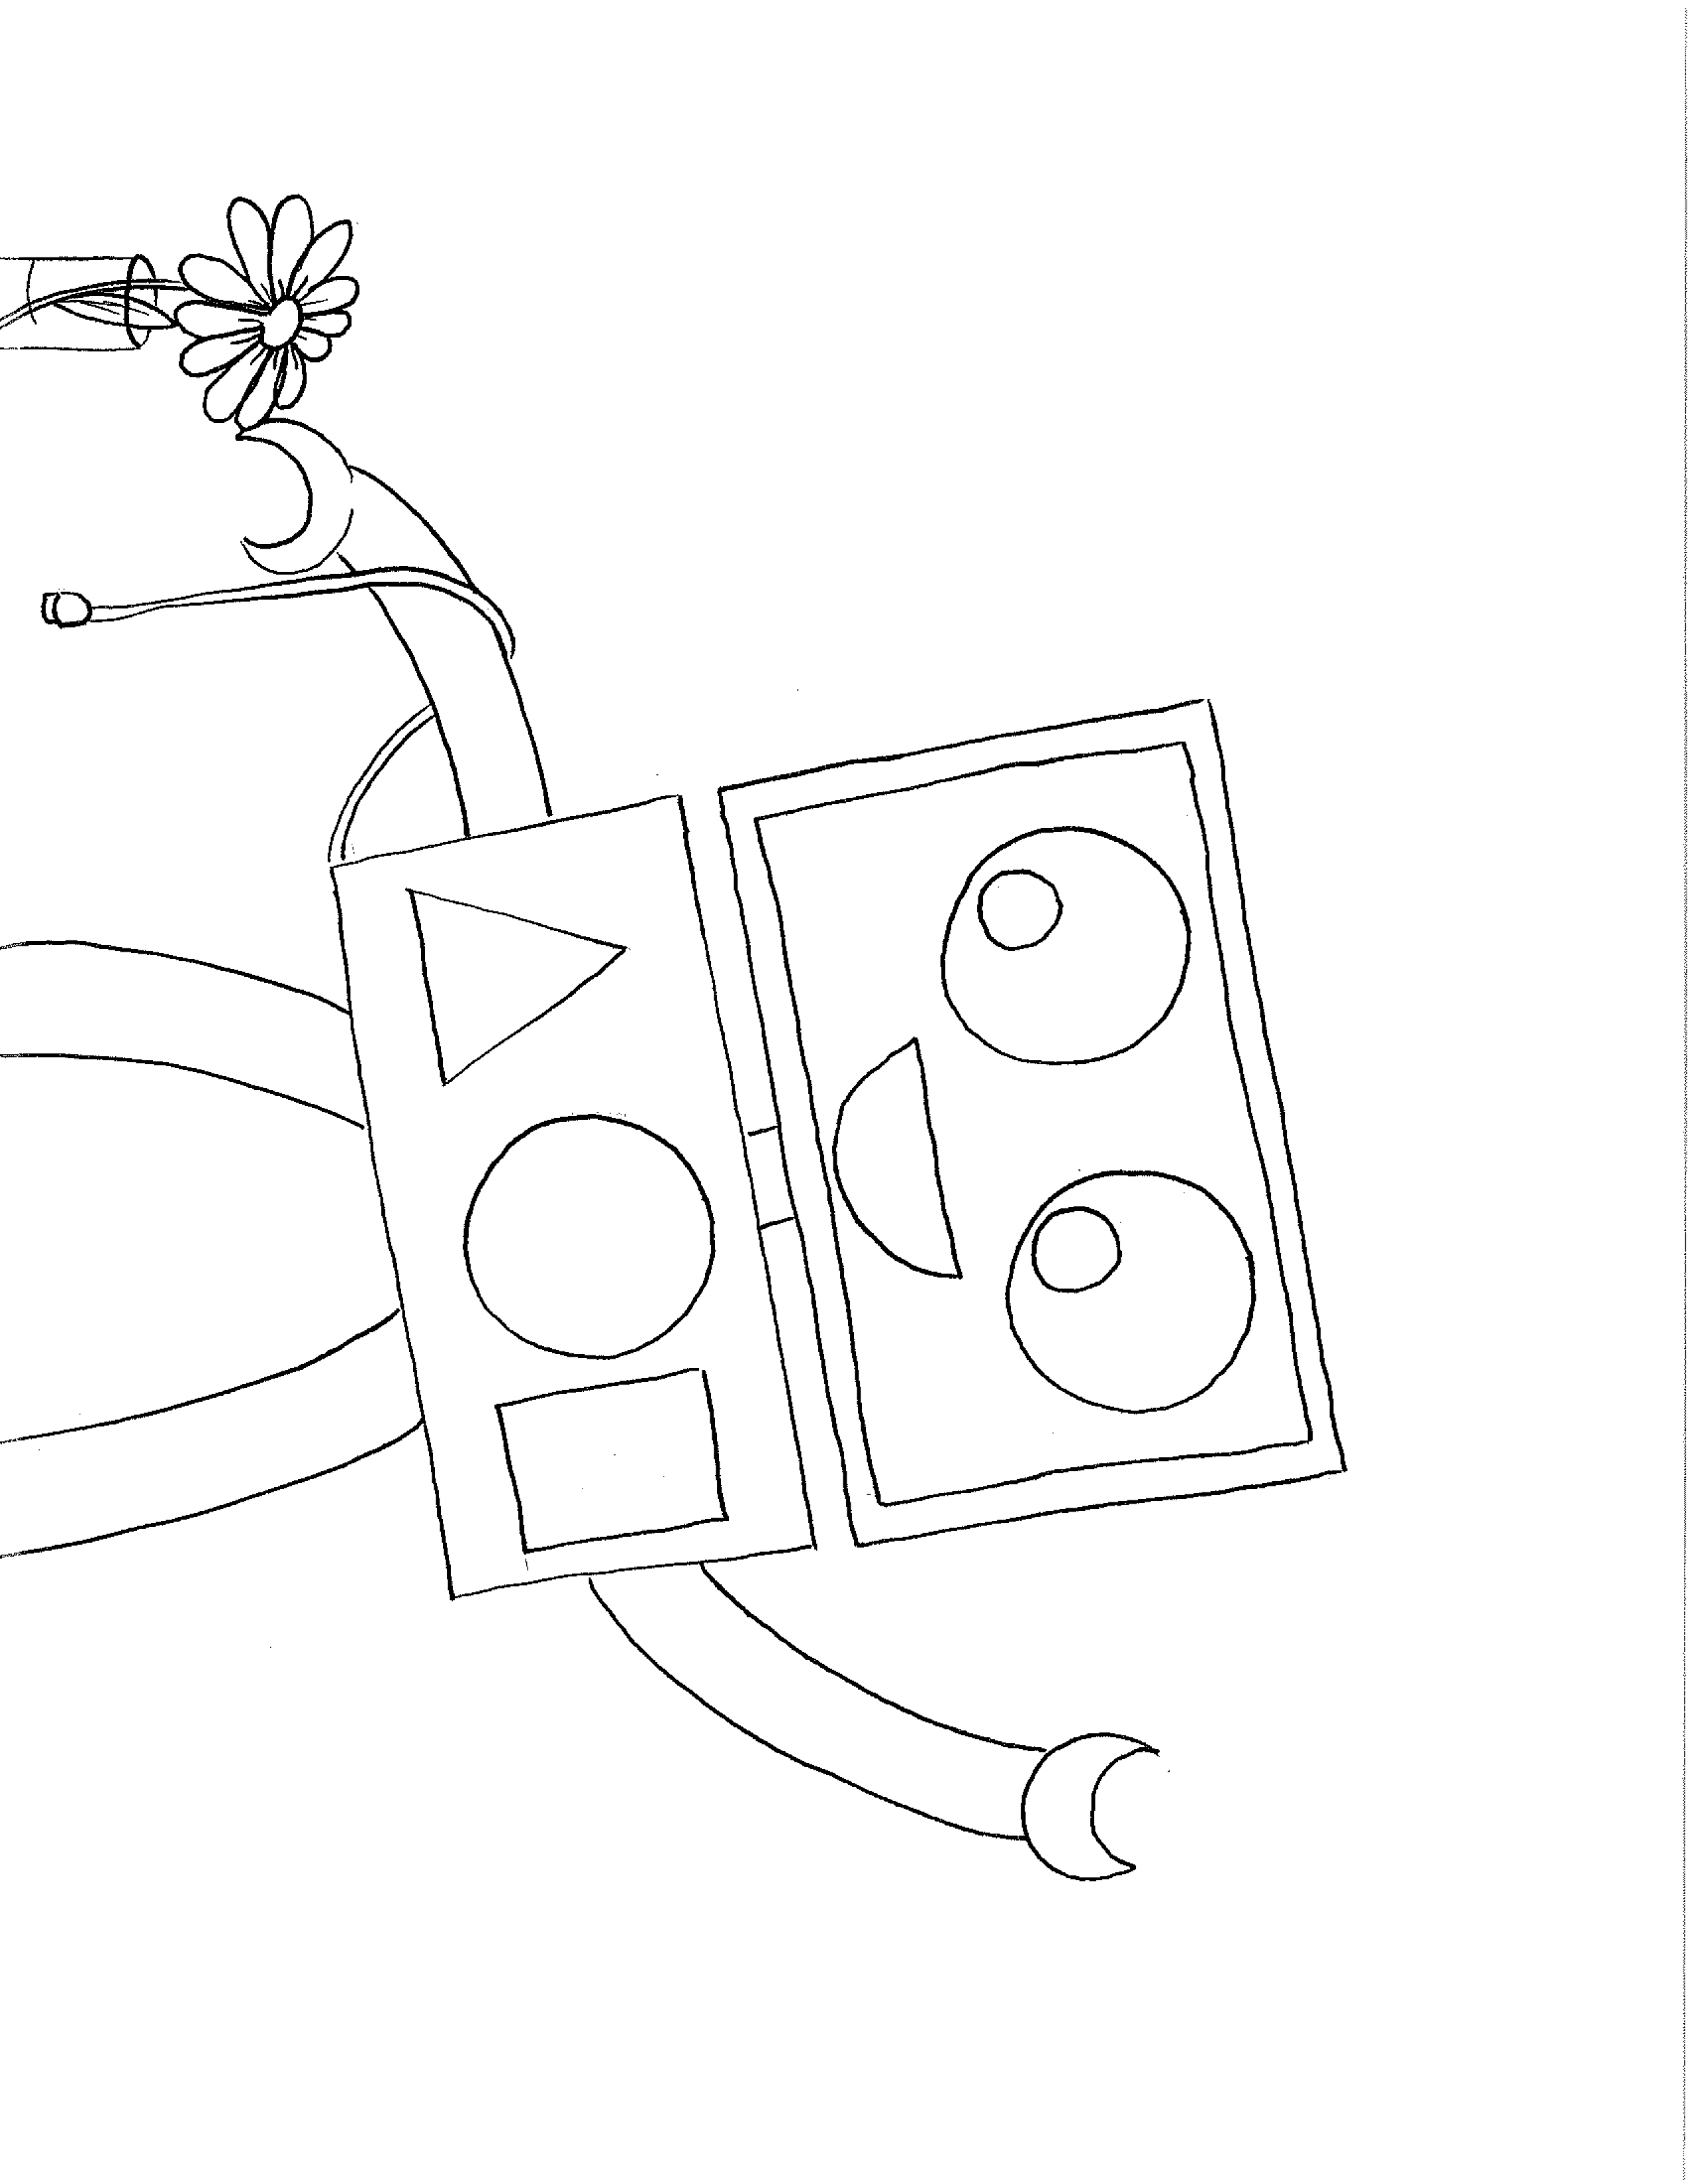 Unplugged colouring pages